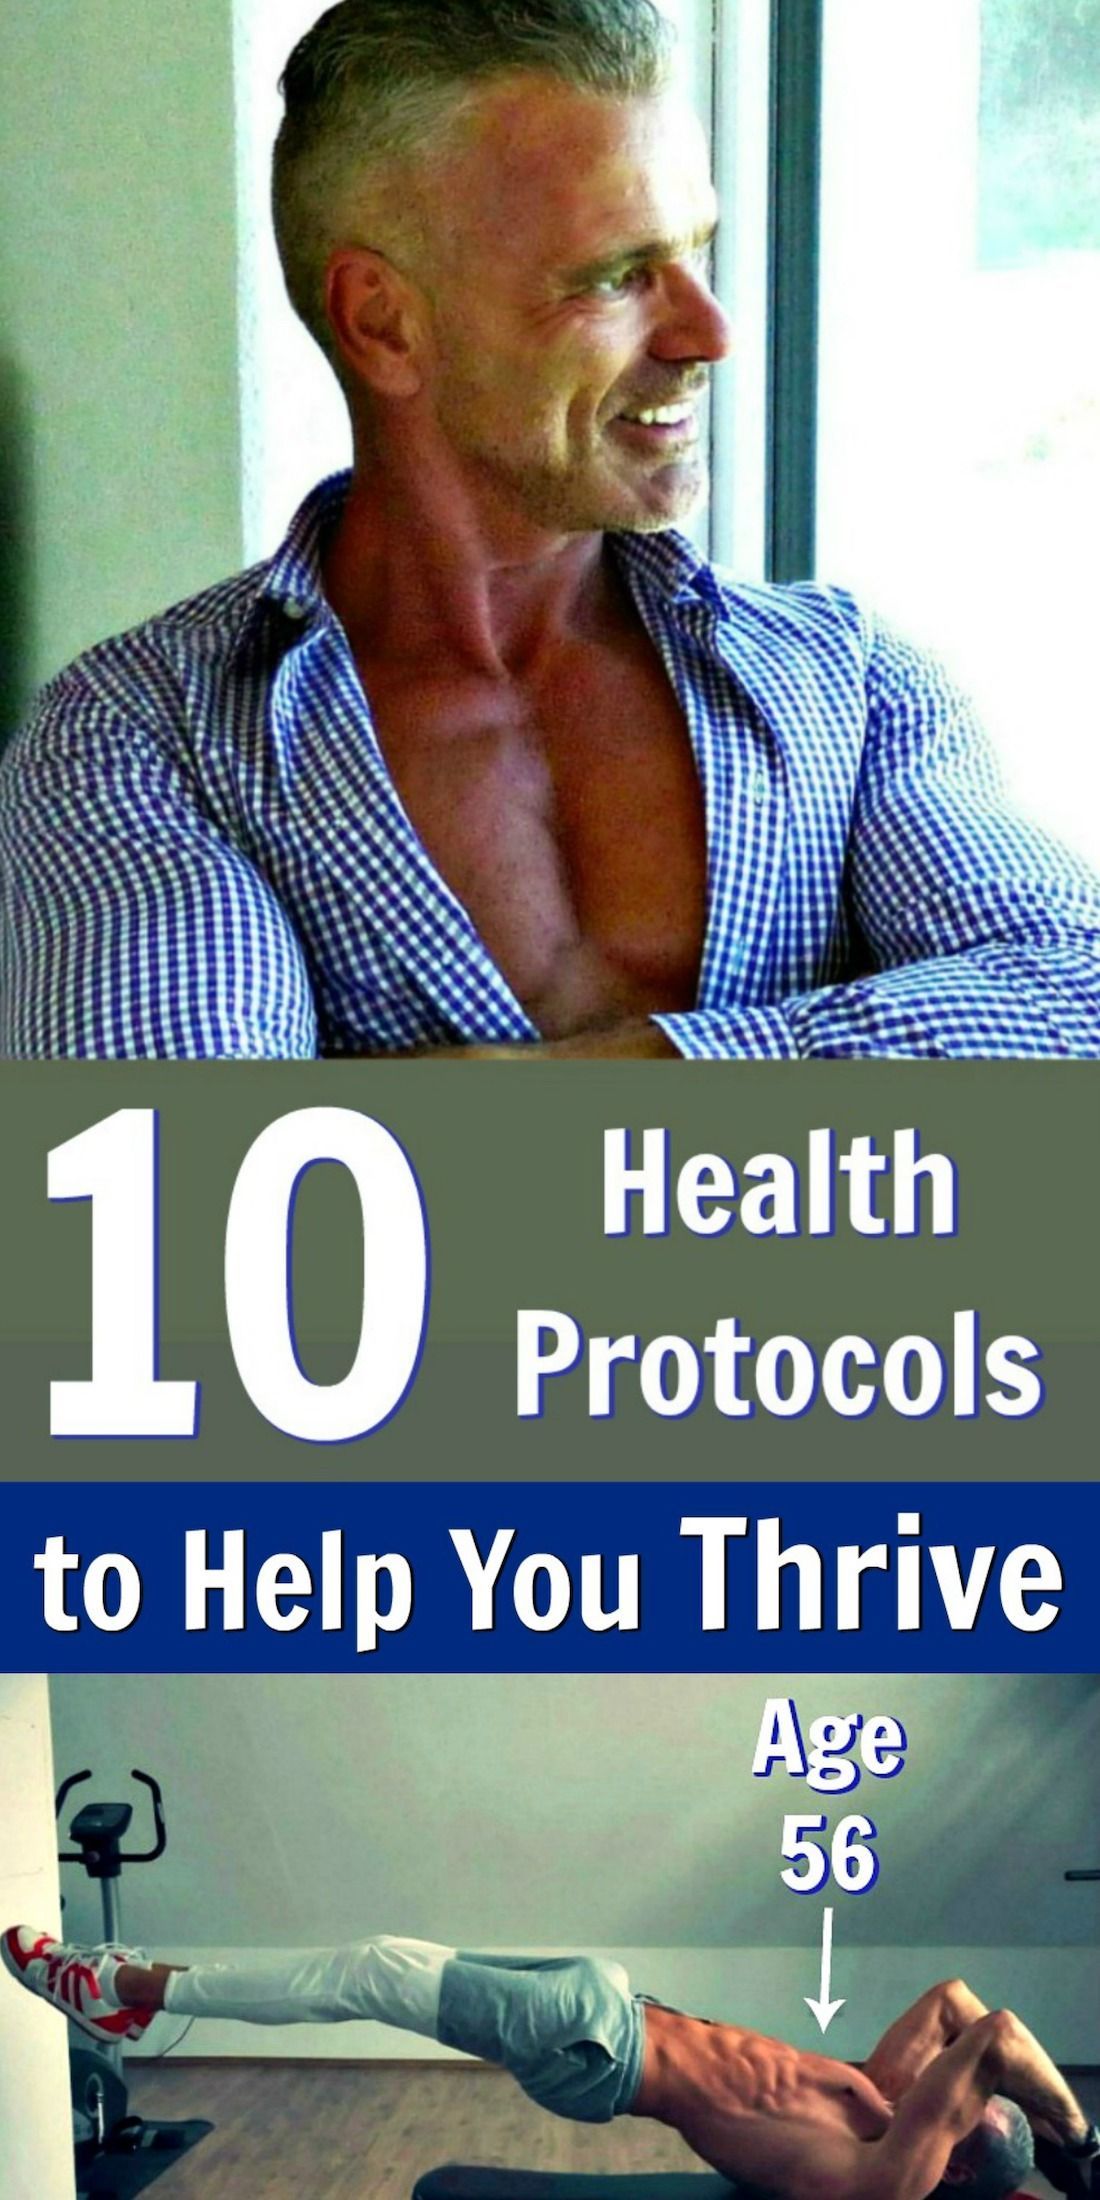 10 Health Protocols that Will Help You Look Better Naked